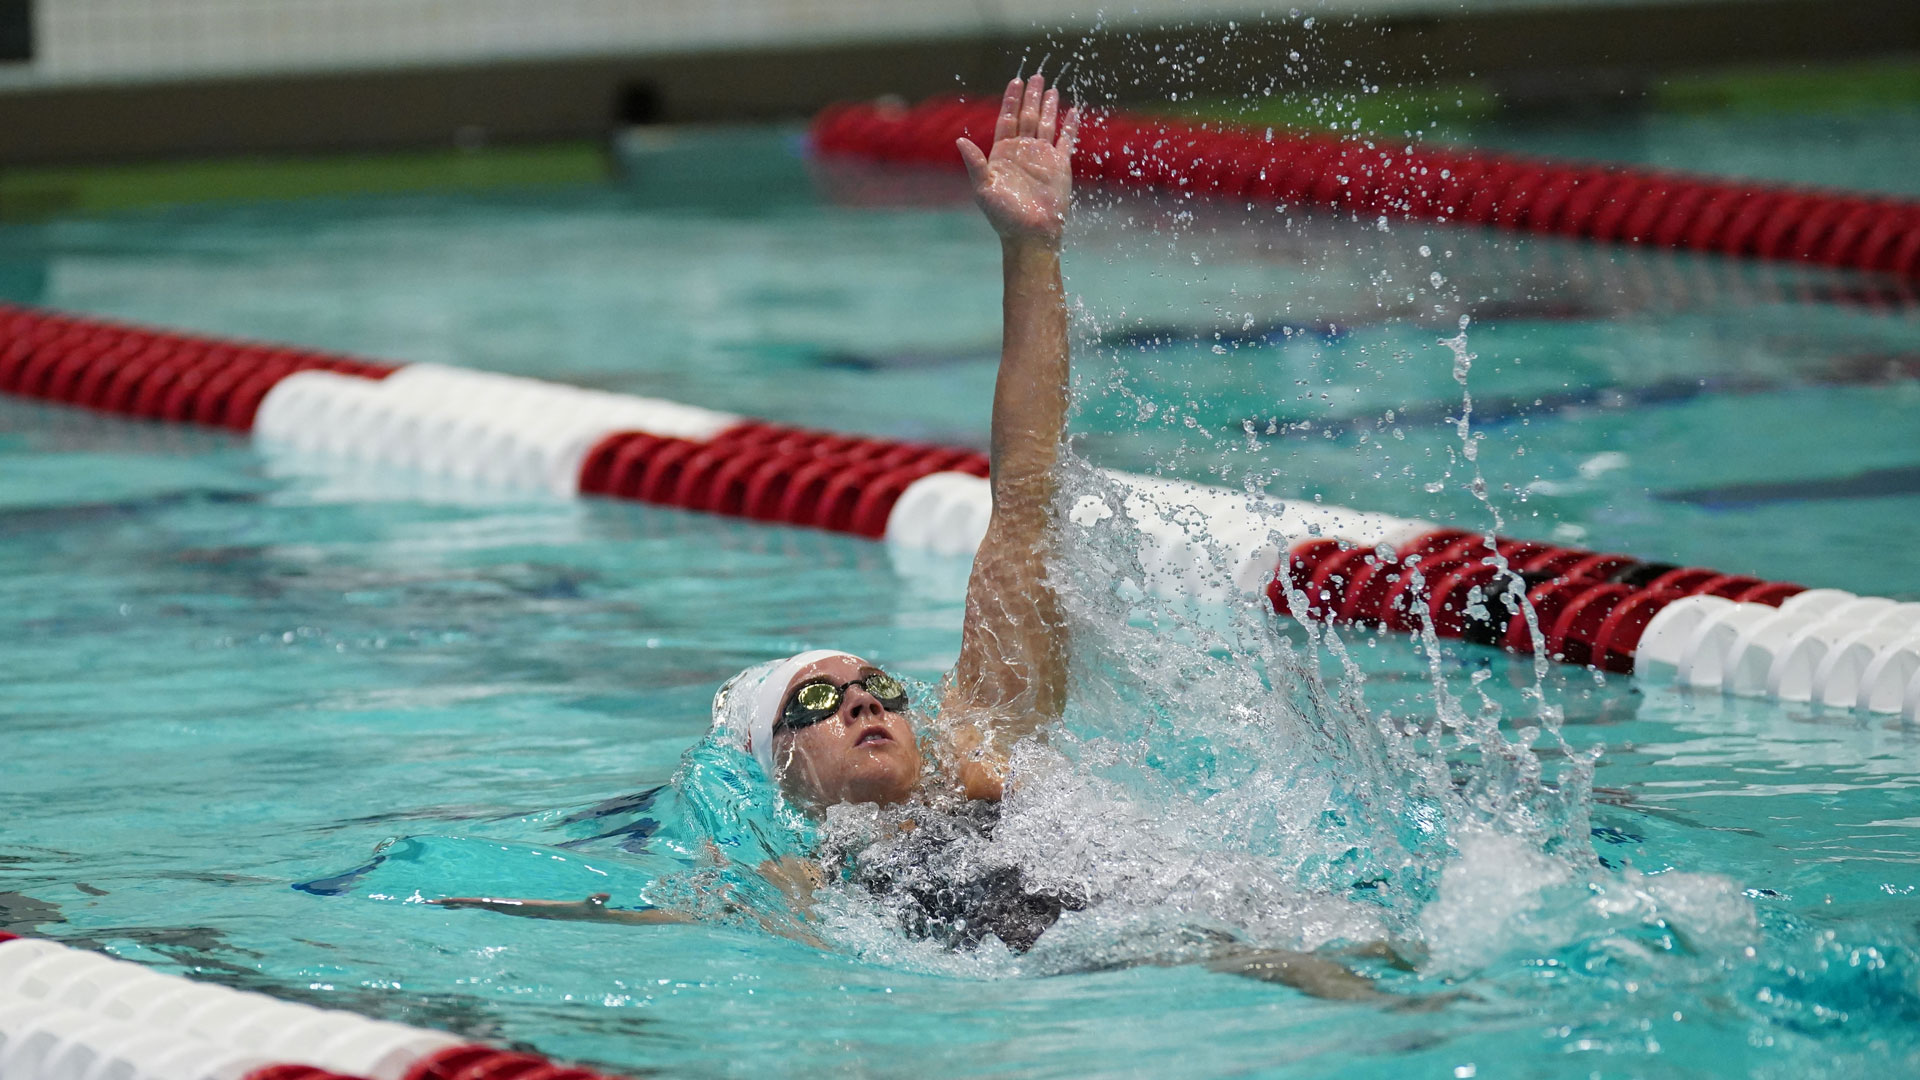 A woman is swimming the backstroke, with one arm getting ready to paddle. Crimson and white lane lines are also shown in the pool.